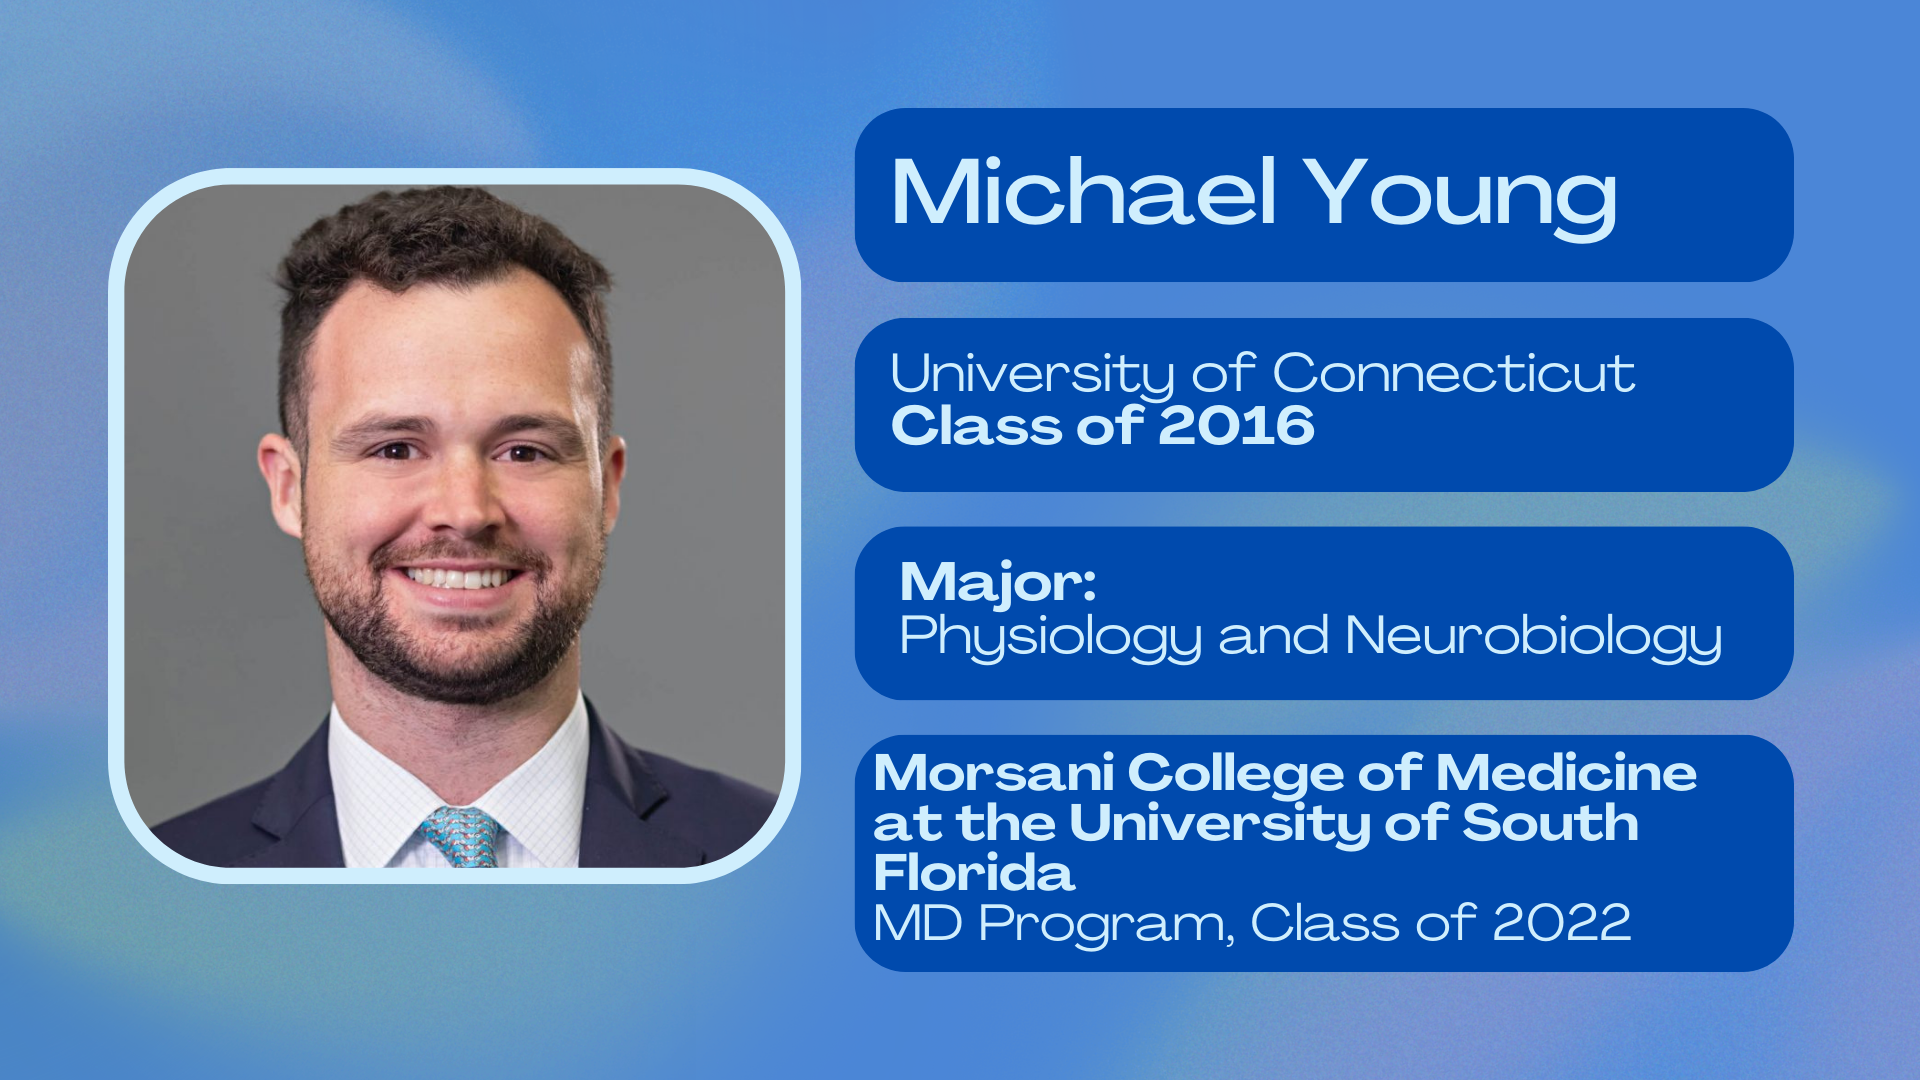 Michael Young; University of Connecticut Class of 2016; Major: Physiology and Neurobiology; Morsani College of Medicine at the University of South Florida MD program class of 2022